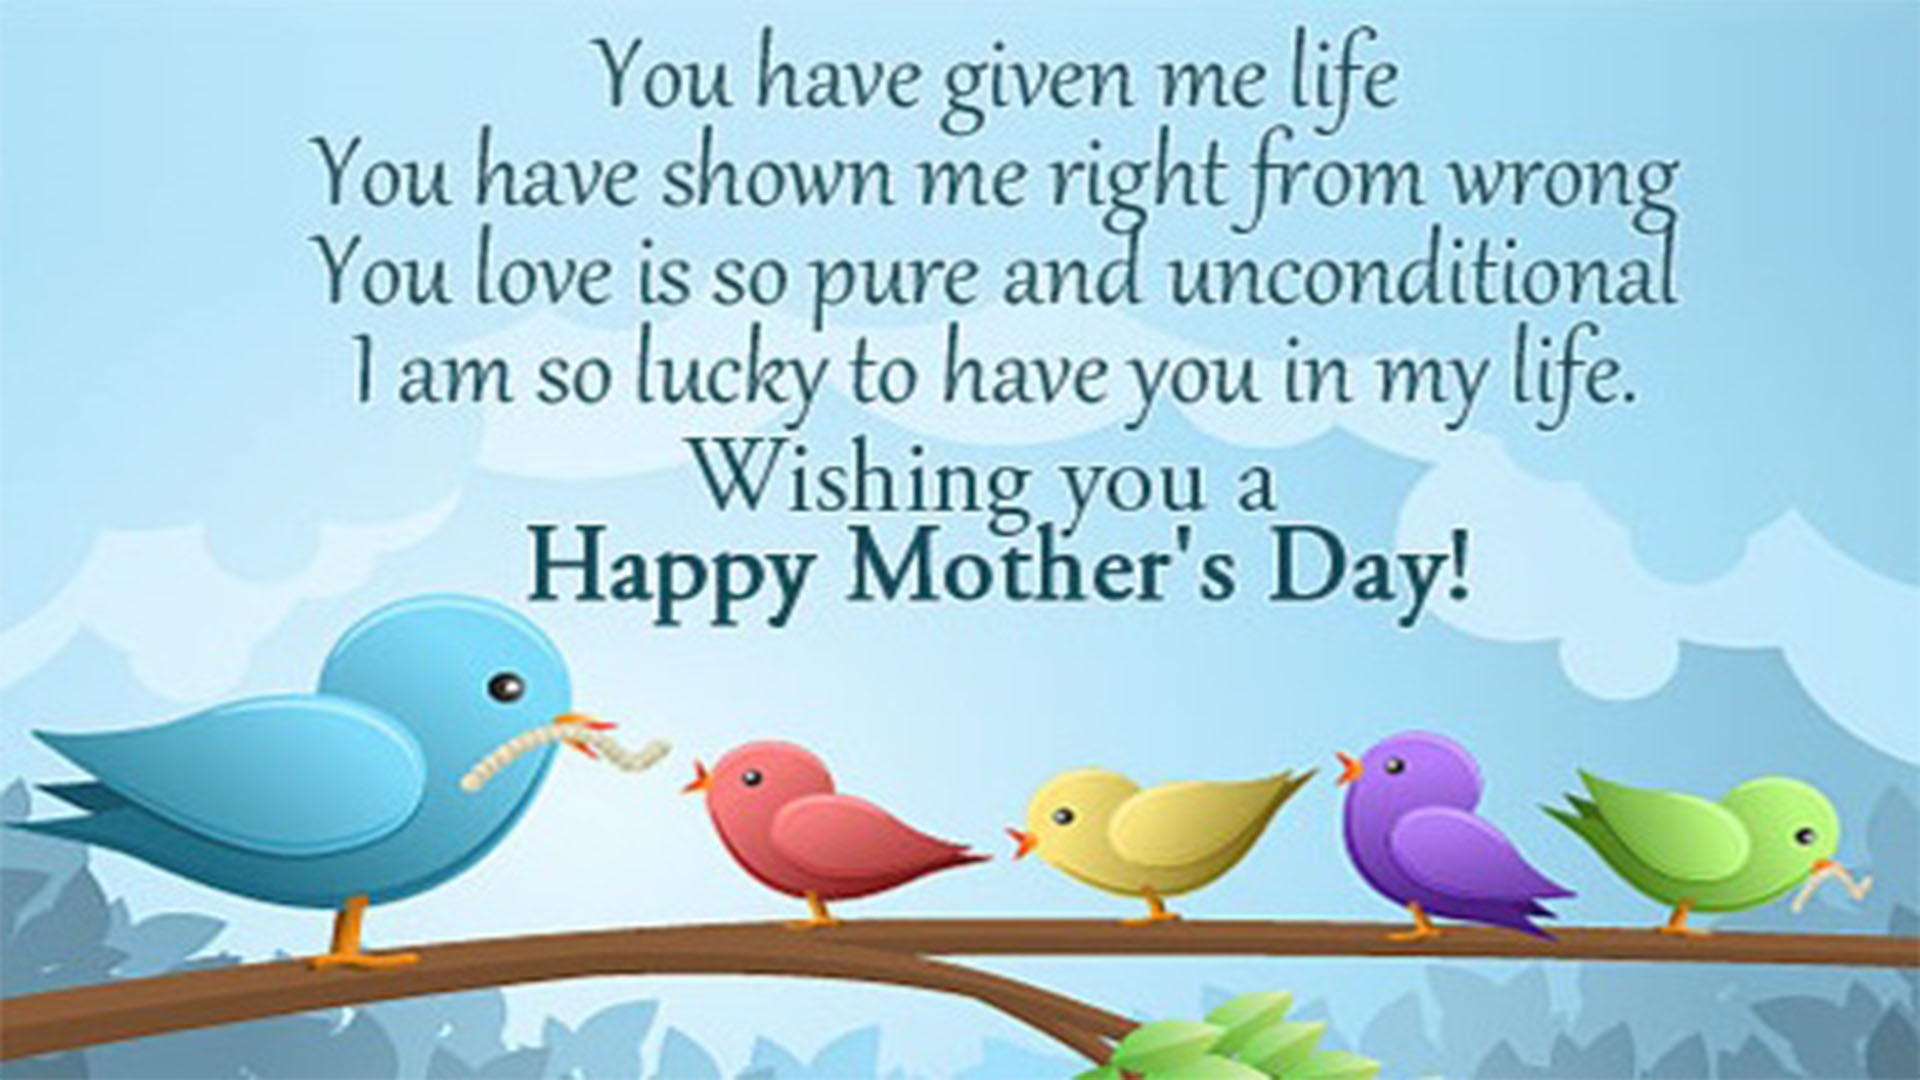 mothers day messages image